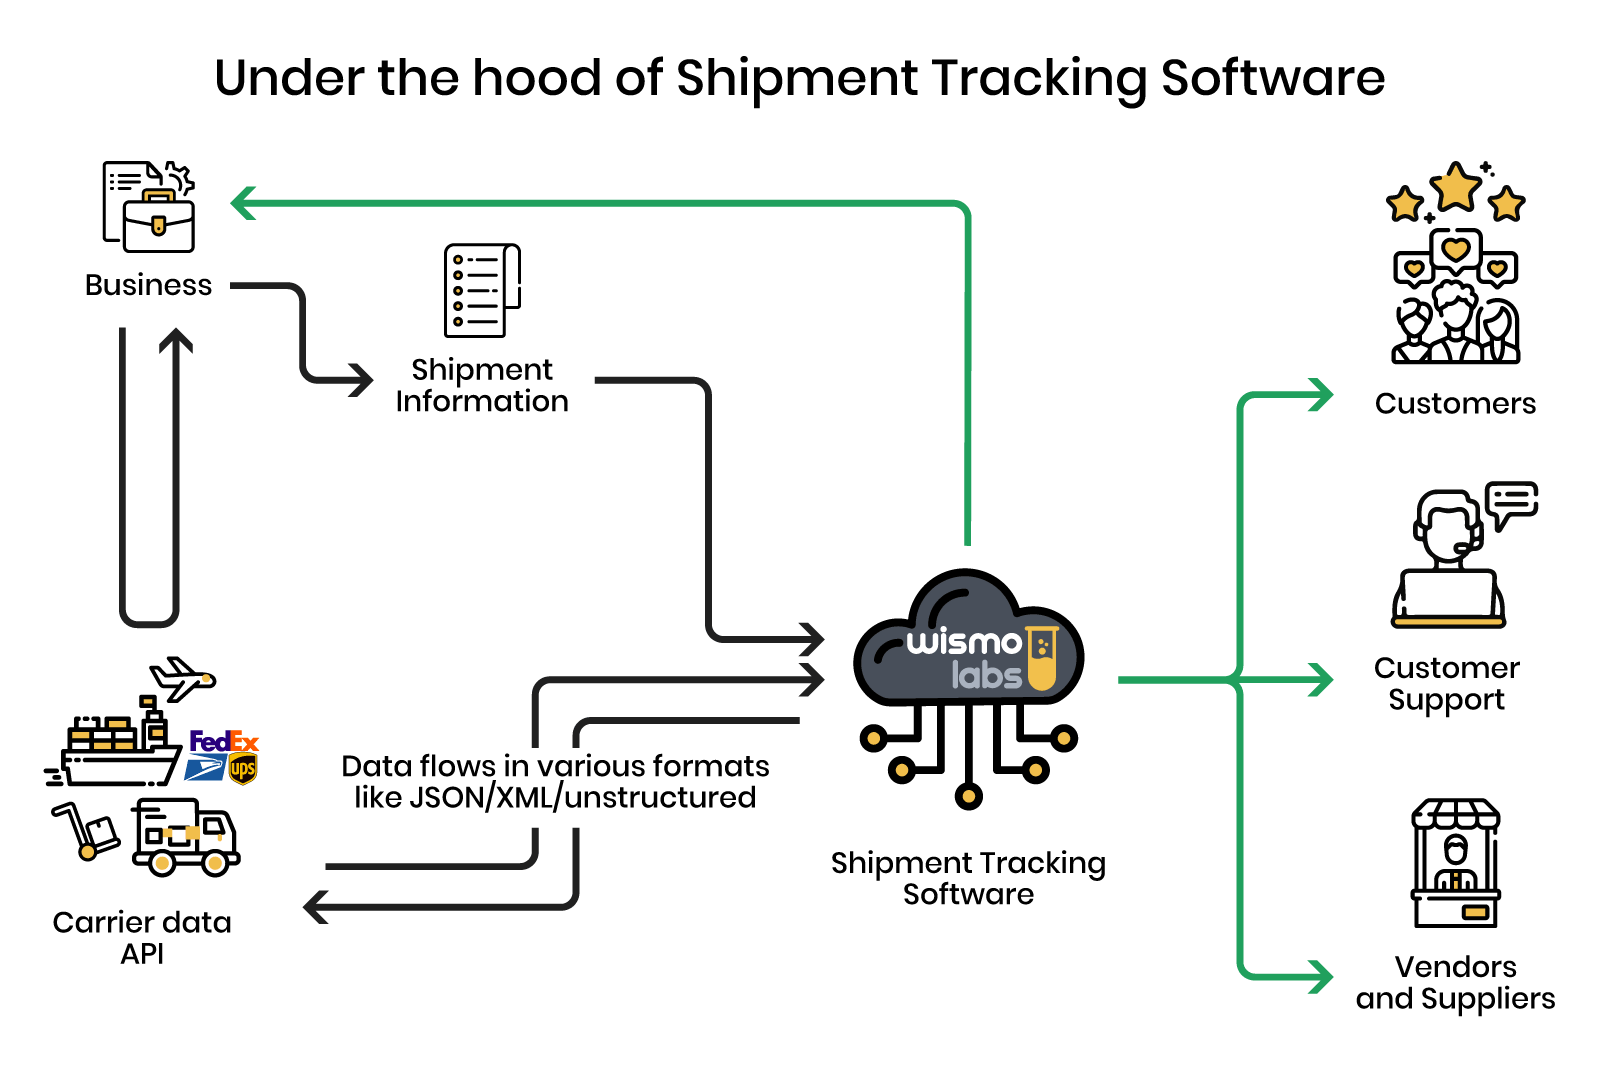 Shipment tracking software: How it works